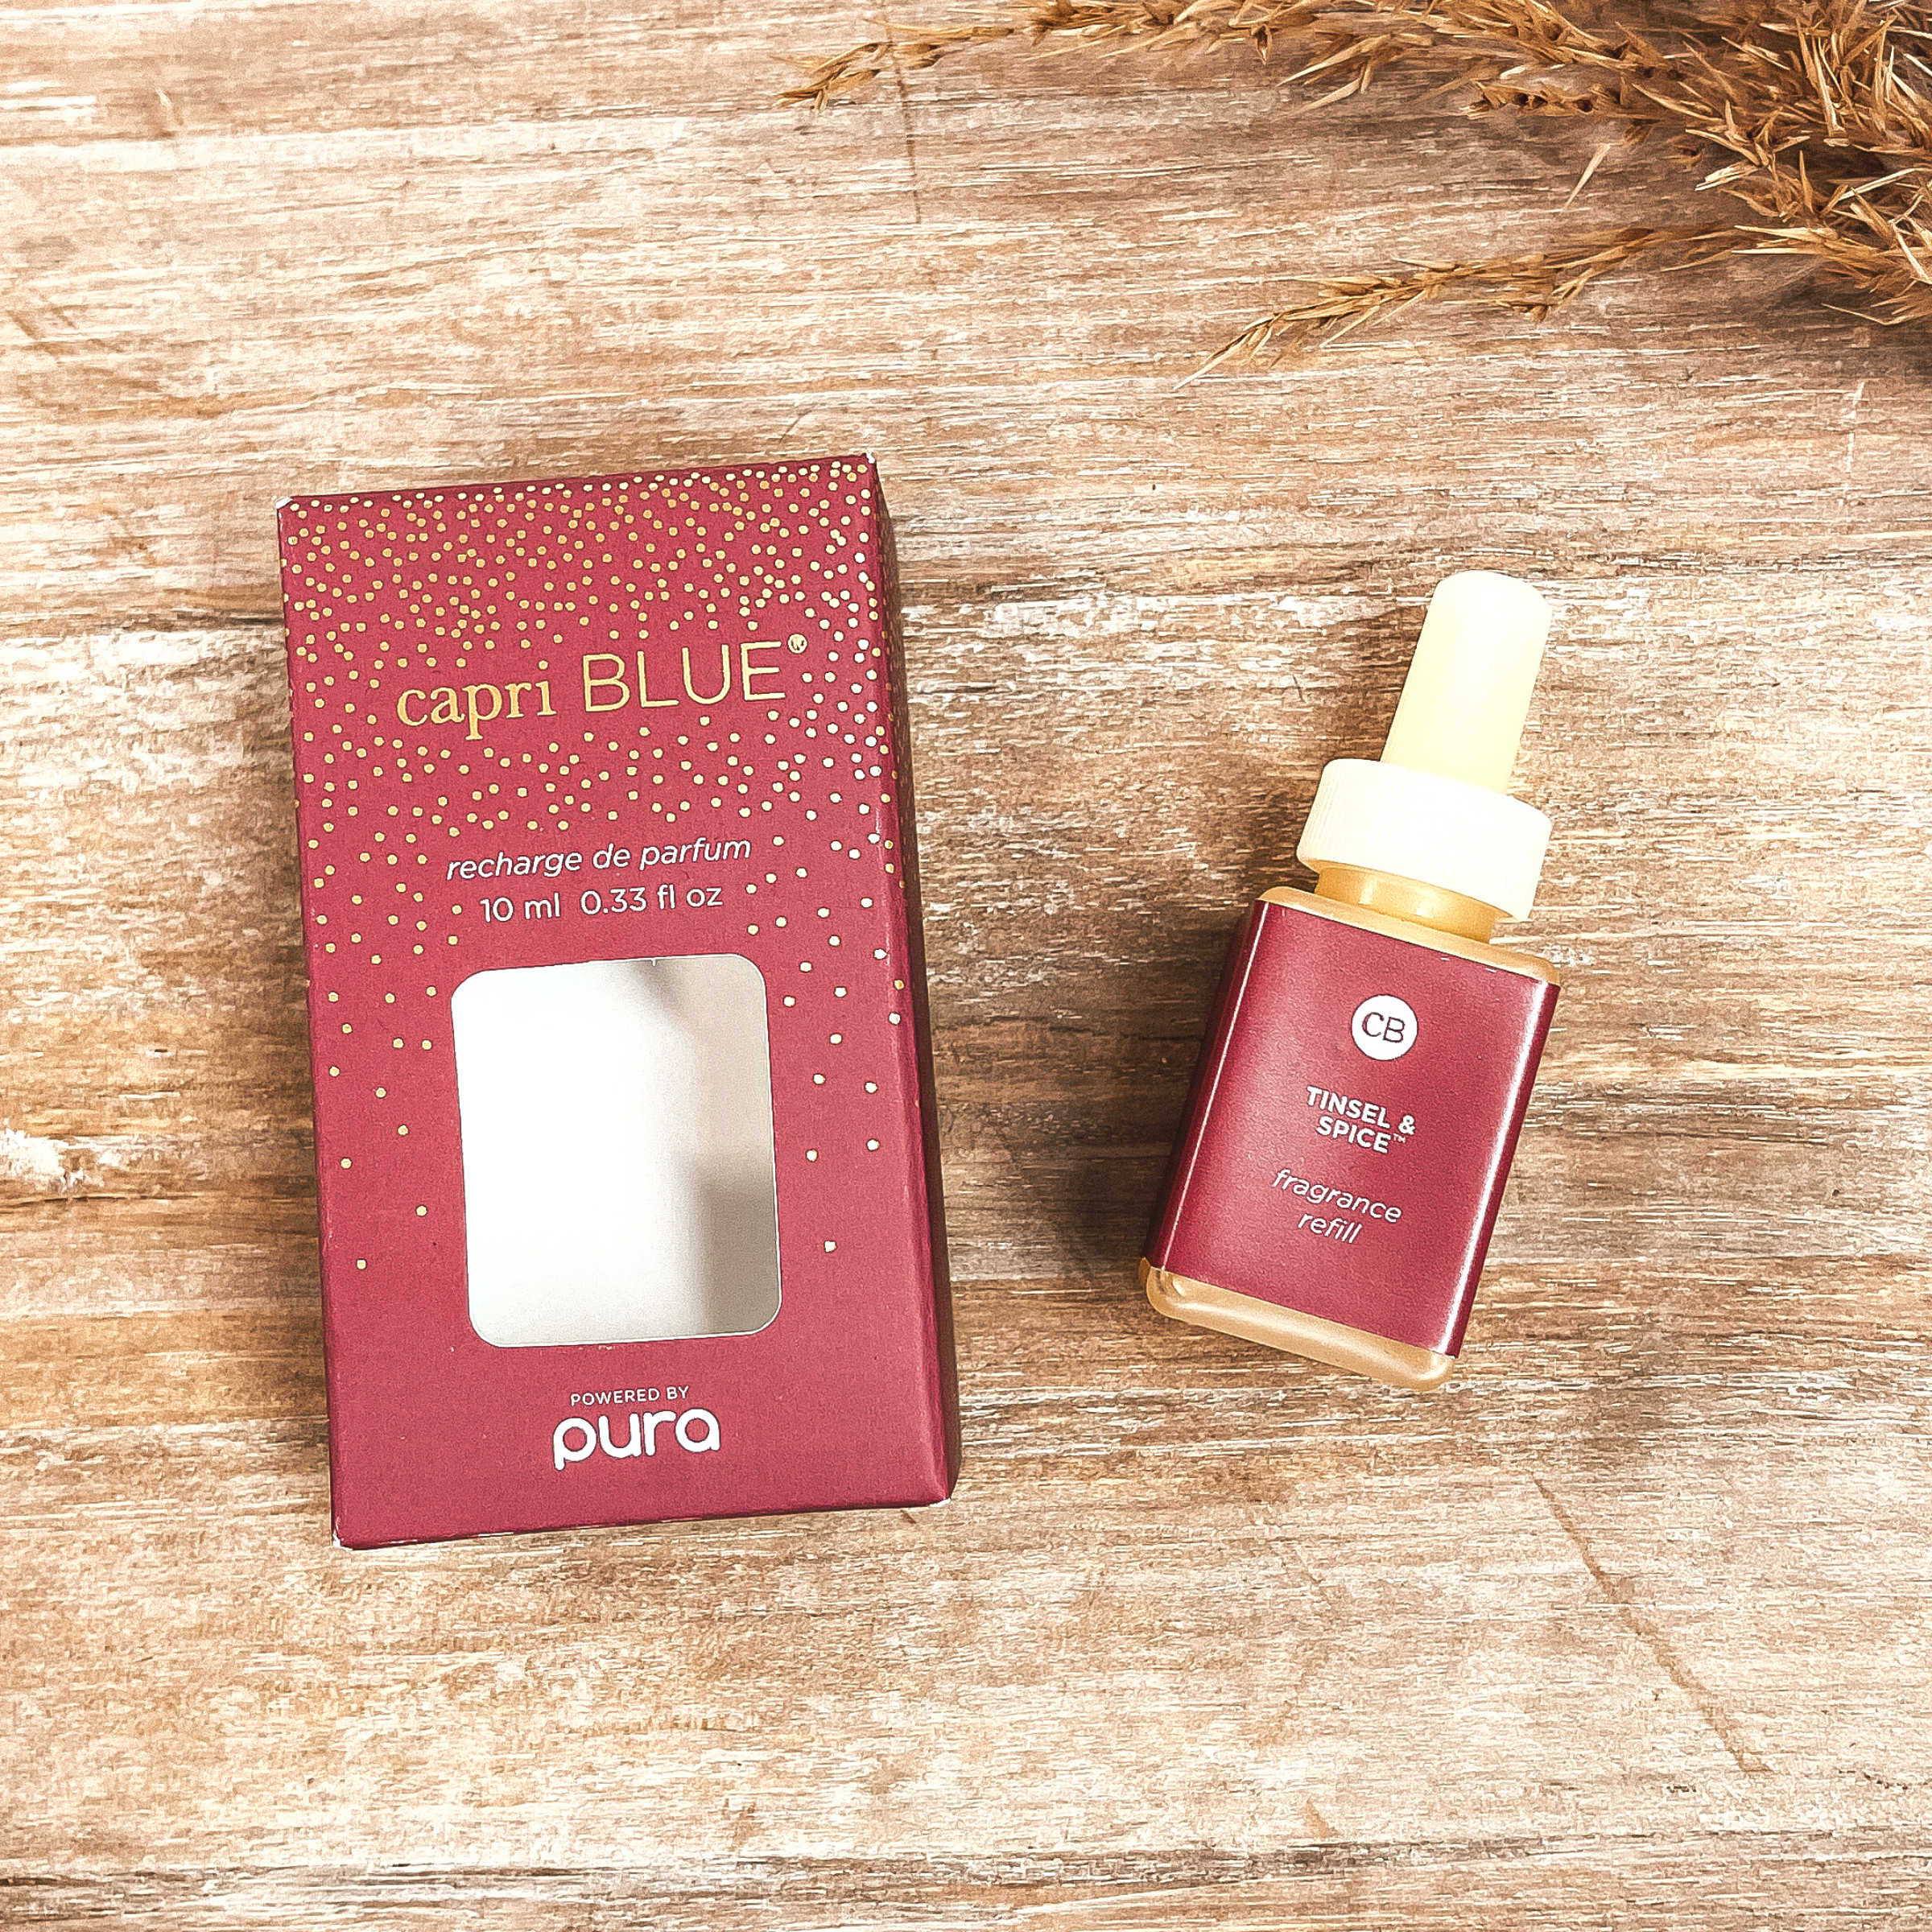 Pura x Capri Blue | Replacement Fragrance Inserts for Smart Home Diffuser | Tinsel & Spice Glimmer - Giddy Up Glamour Boutique